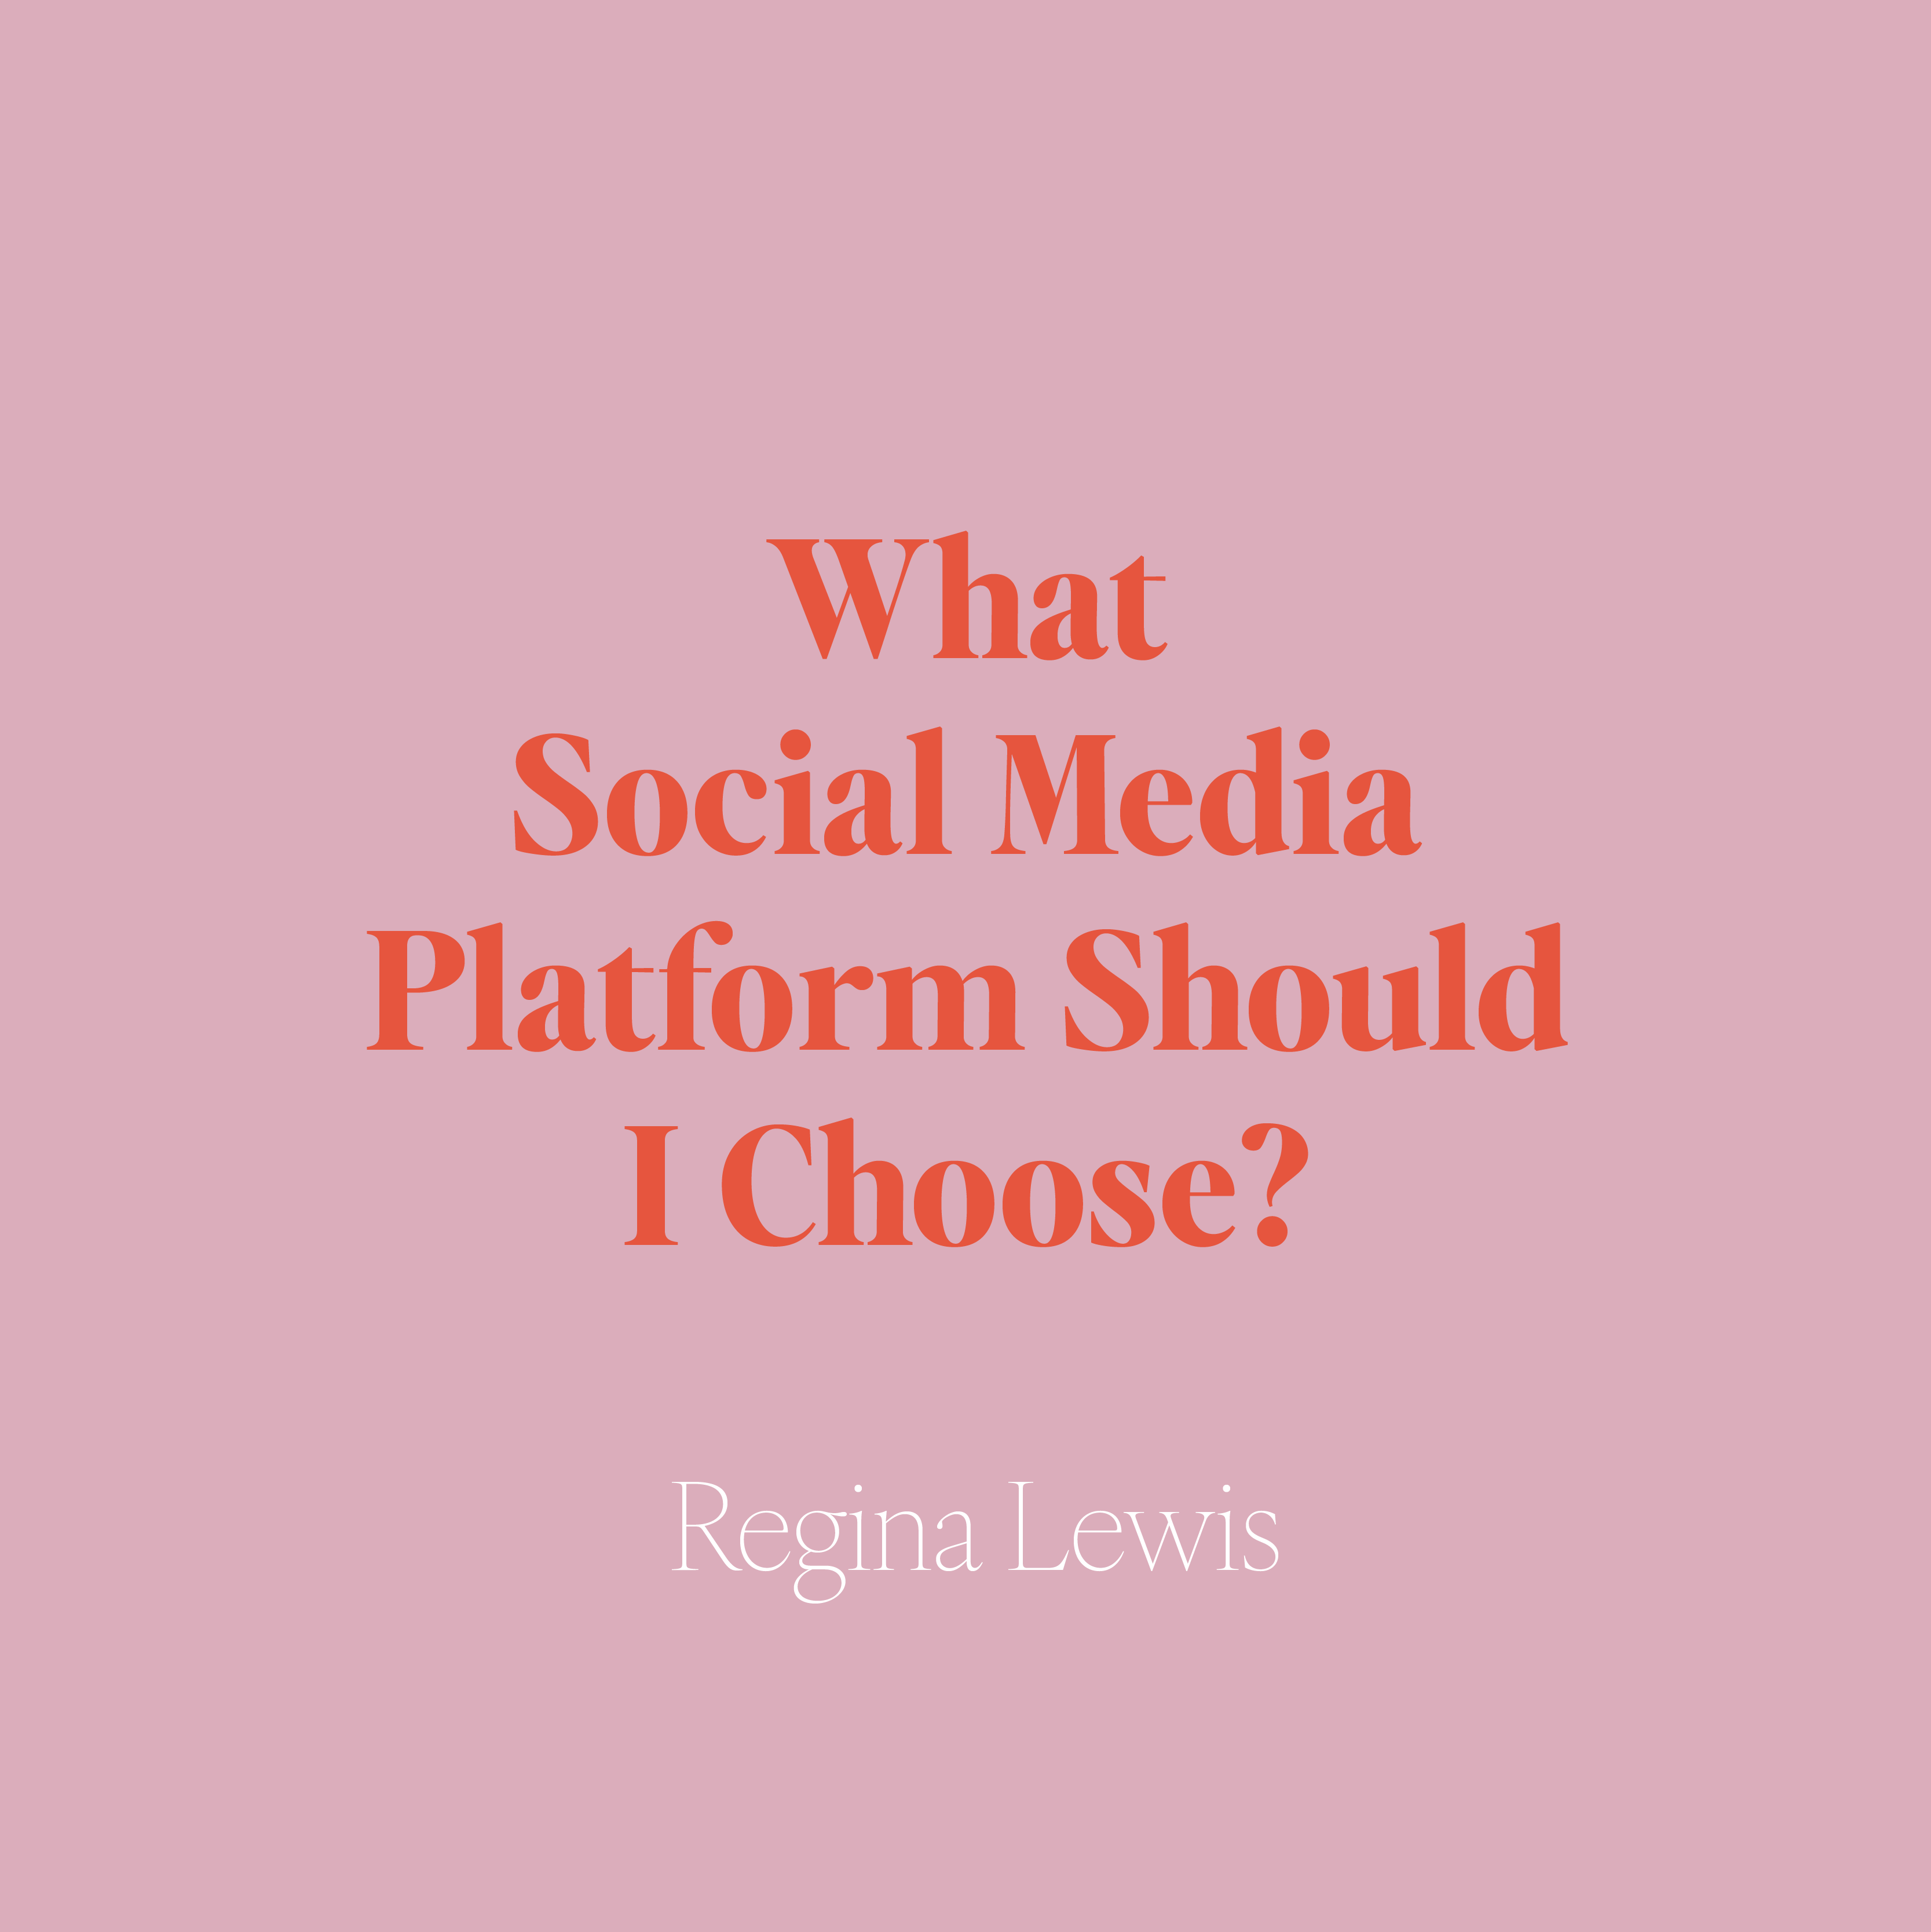 With so many available platforms, deciding what is best for you and your audience can be overwhelming. Here are some ideas to help you choose where to build your platform …